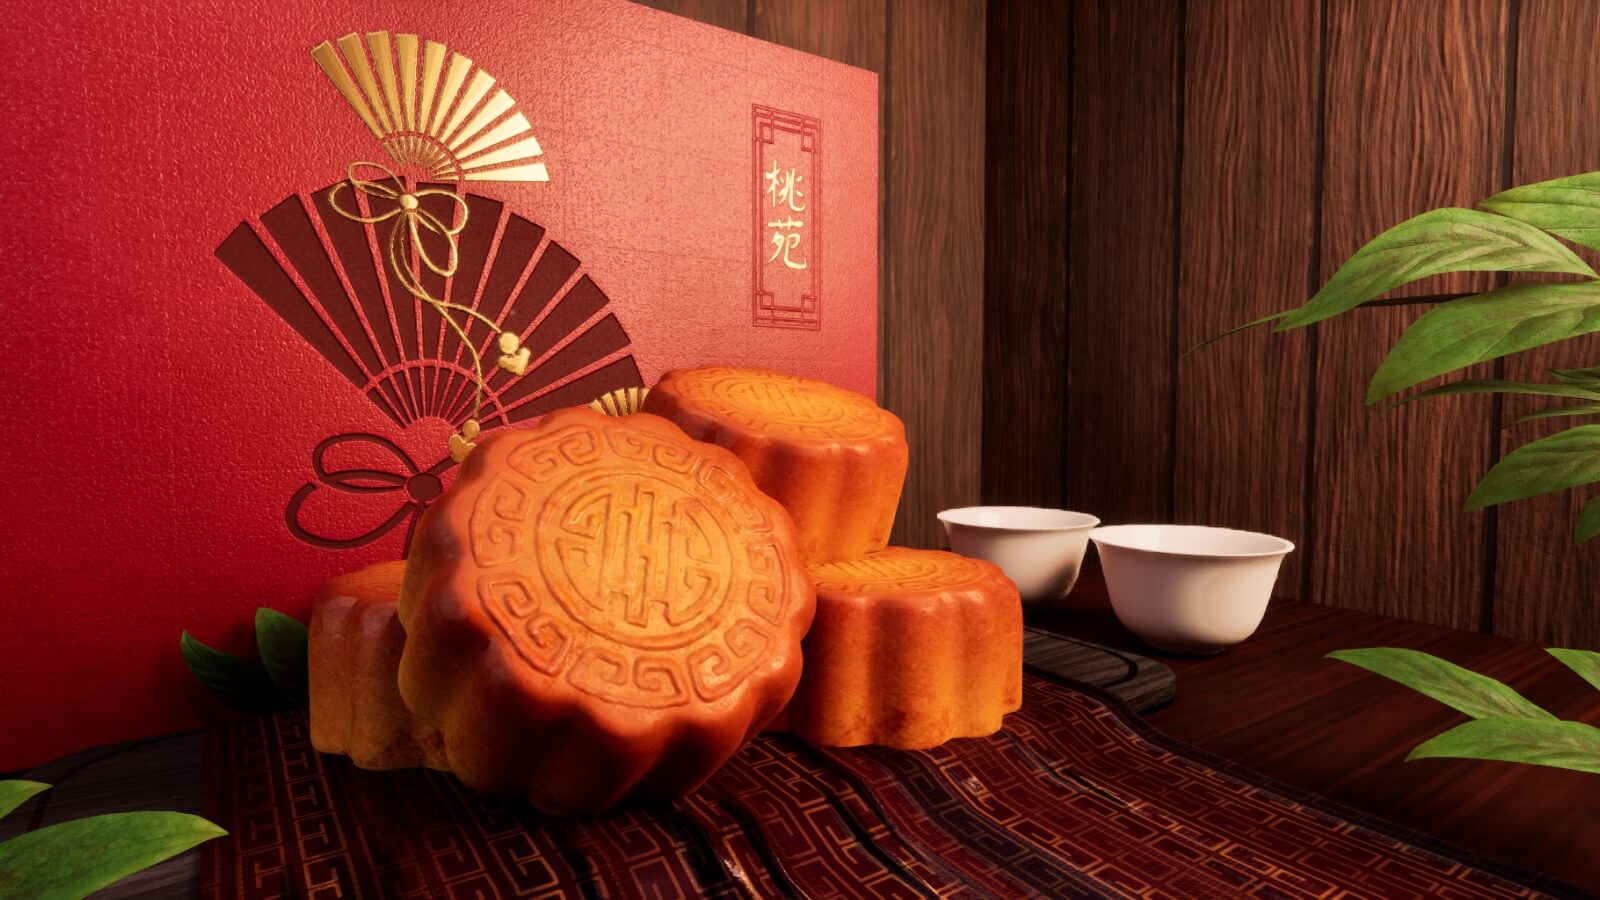 A ground-level close up of moon cakes and cups in front of a red box.